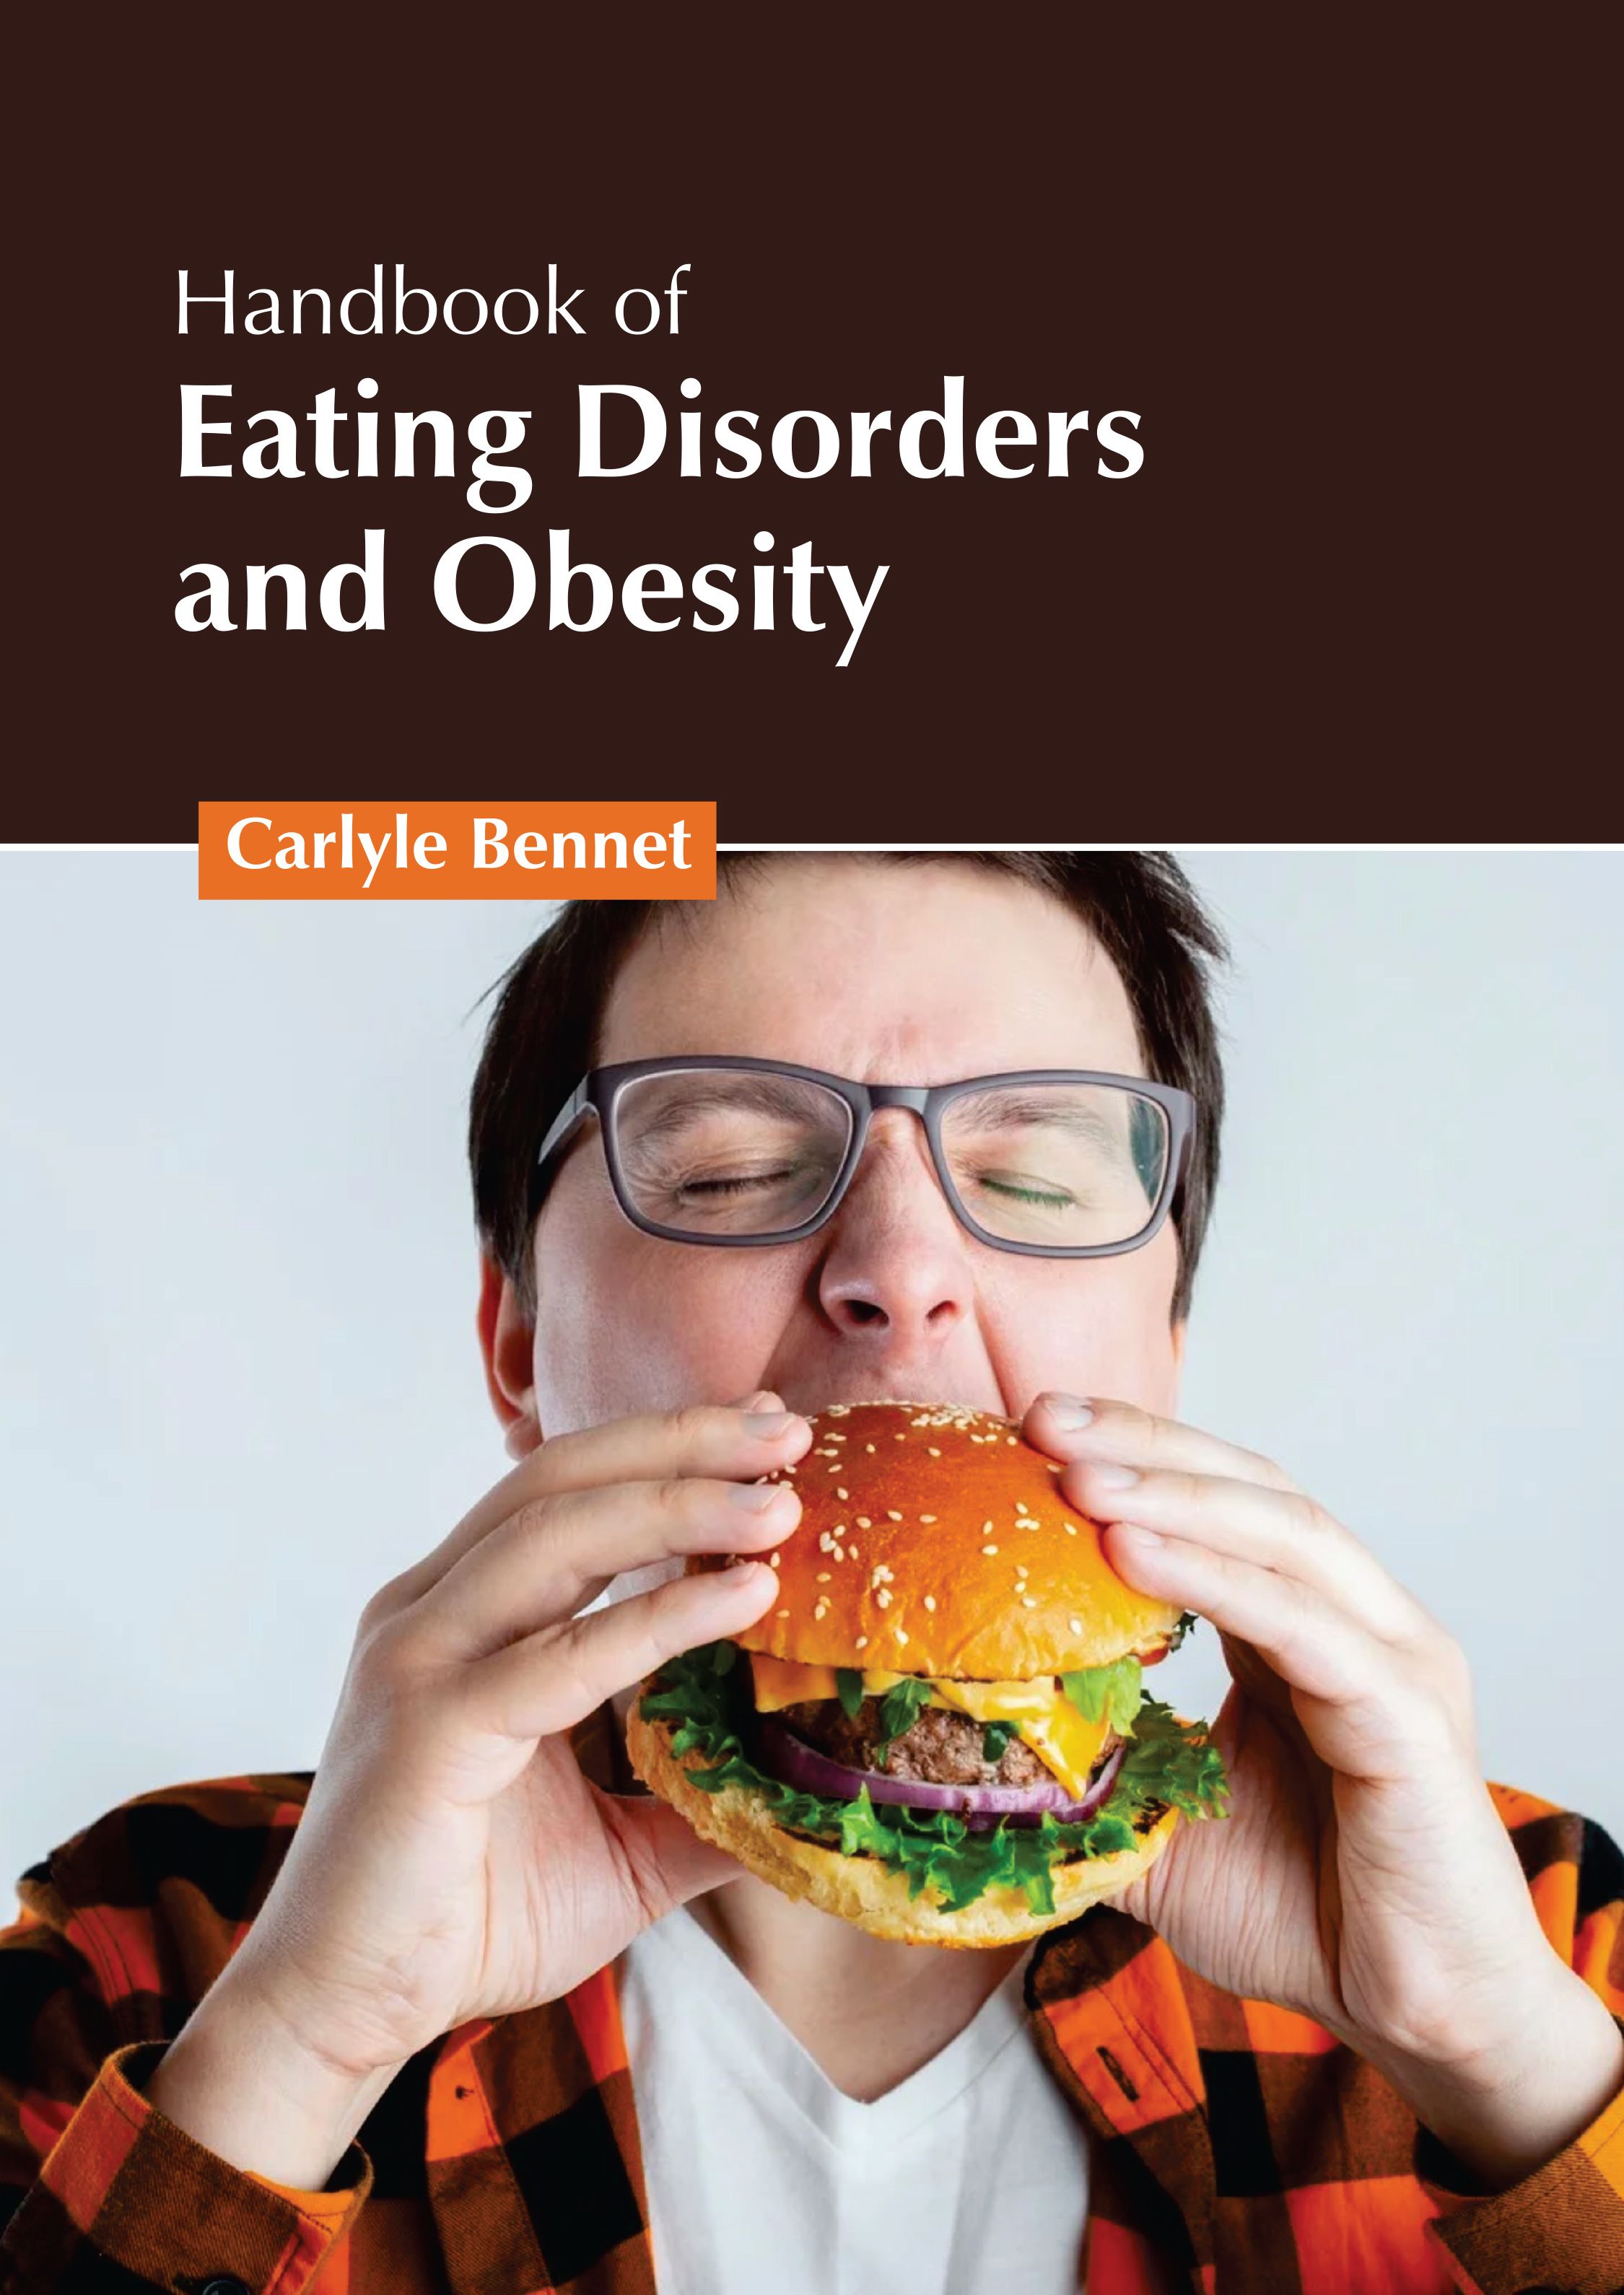 HANDBOOK OF EATING DISORDERS AND OBESITY